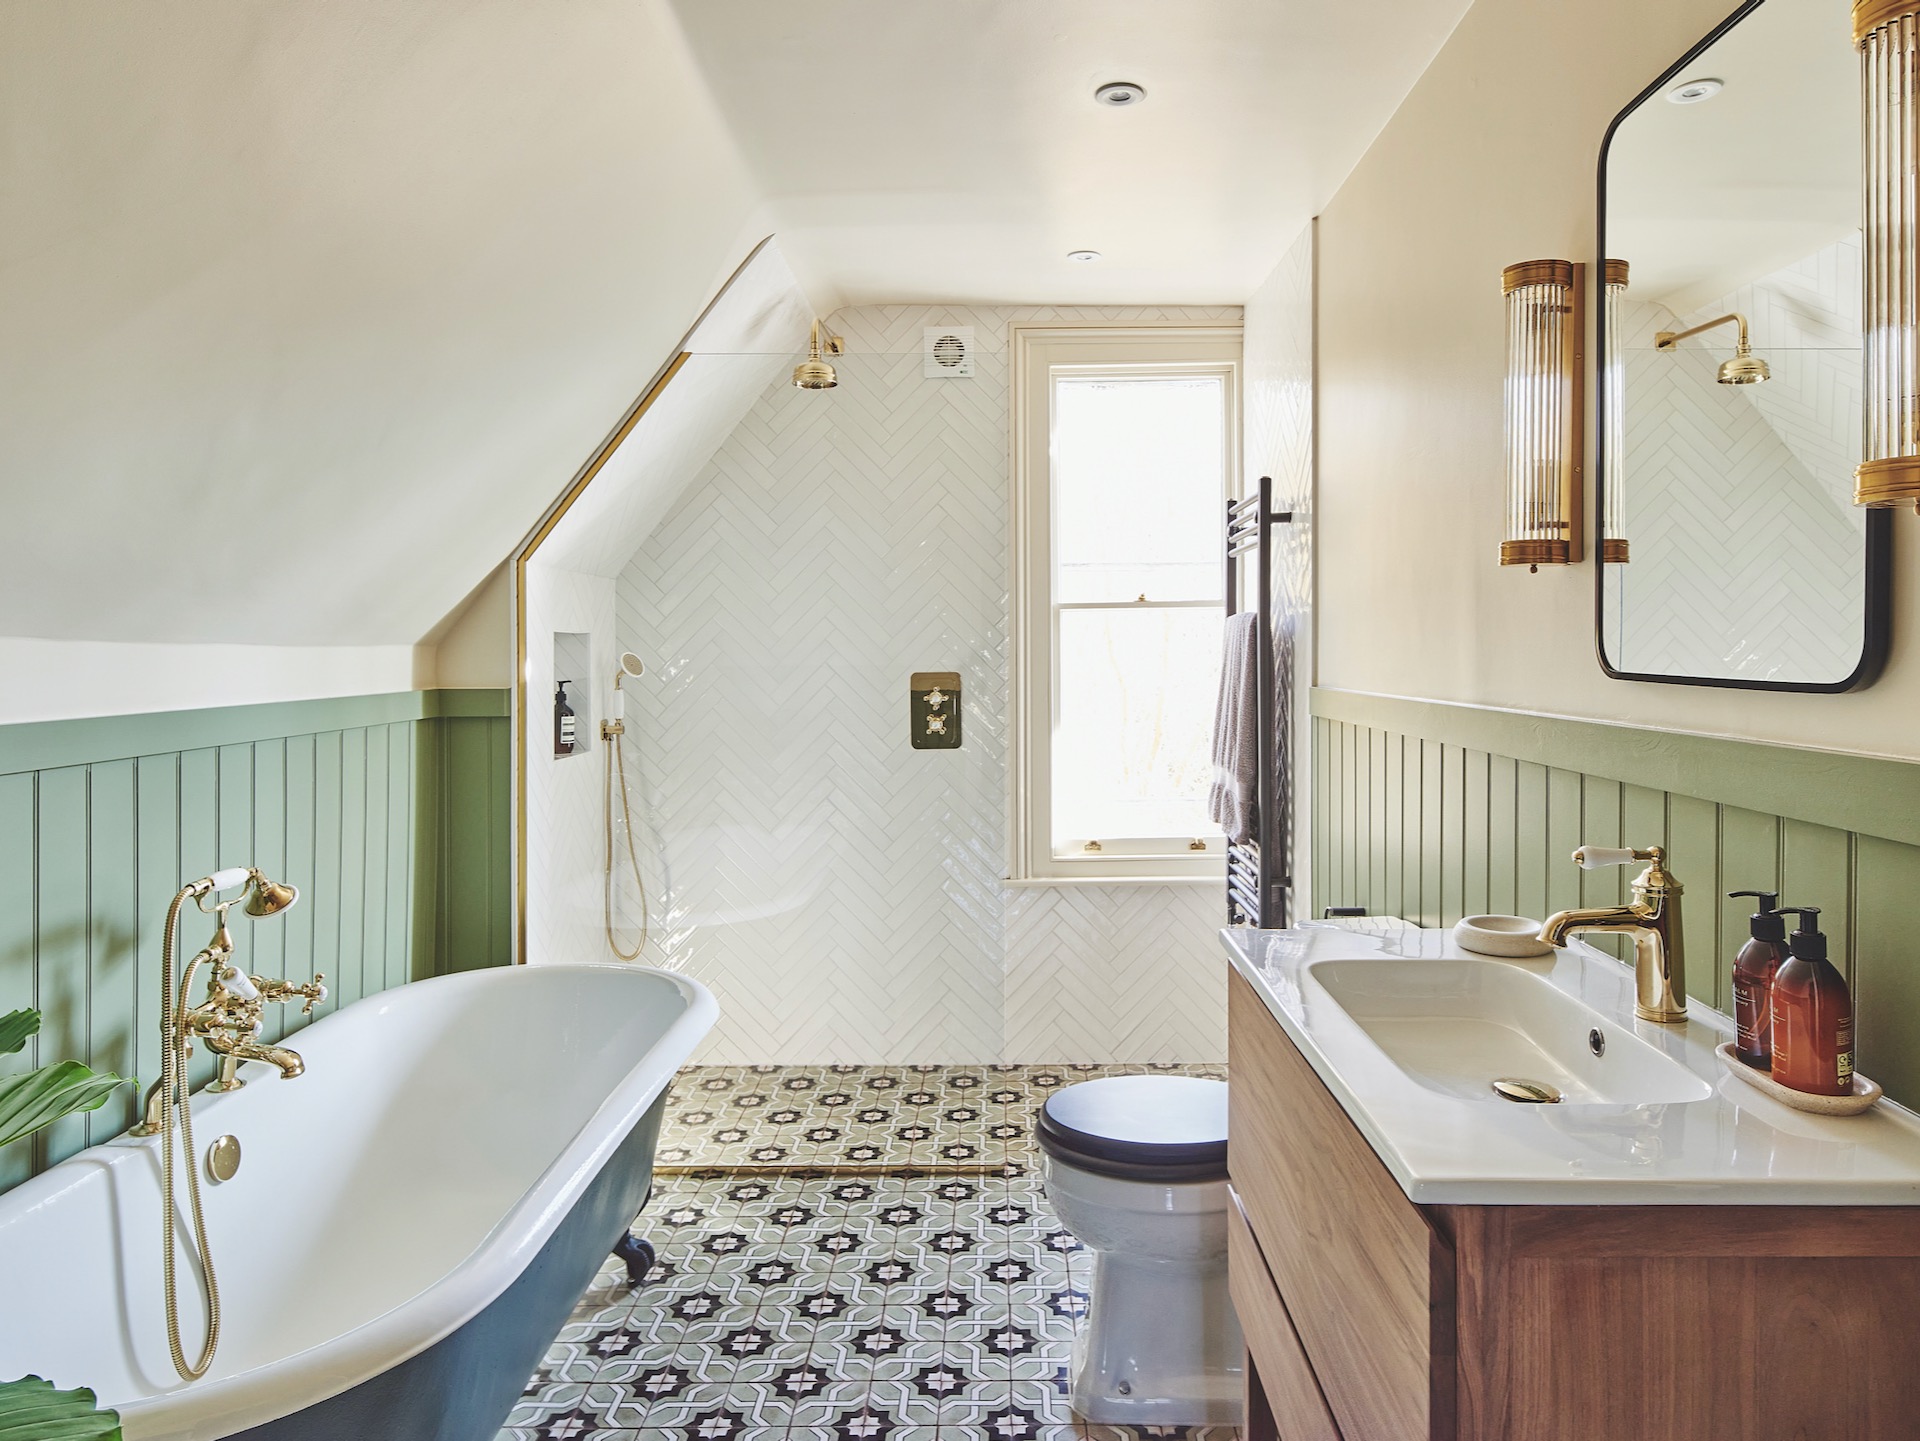 Attic bathroom with patterned tile floor, walk-in shower and green panelling